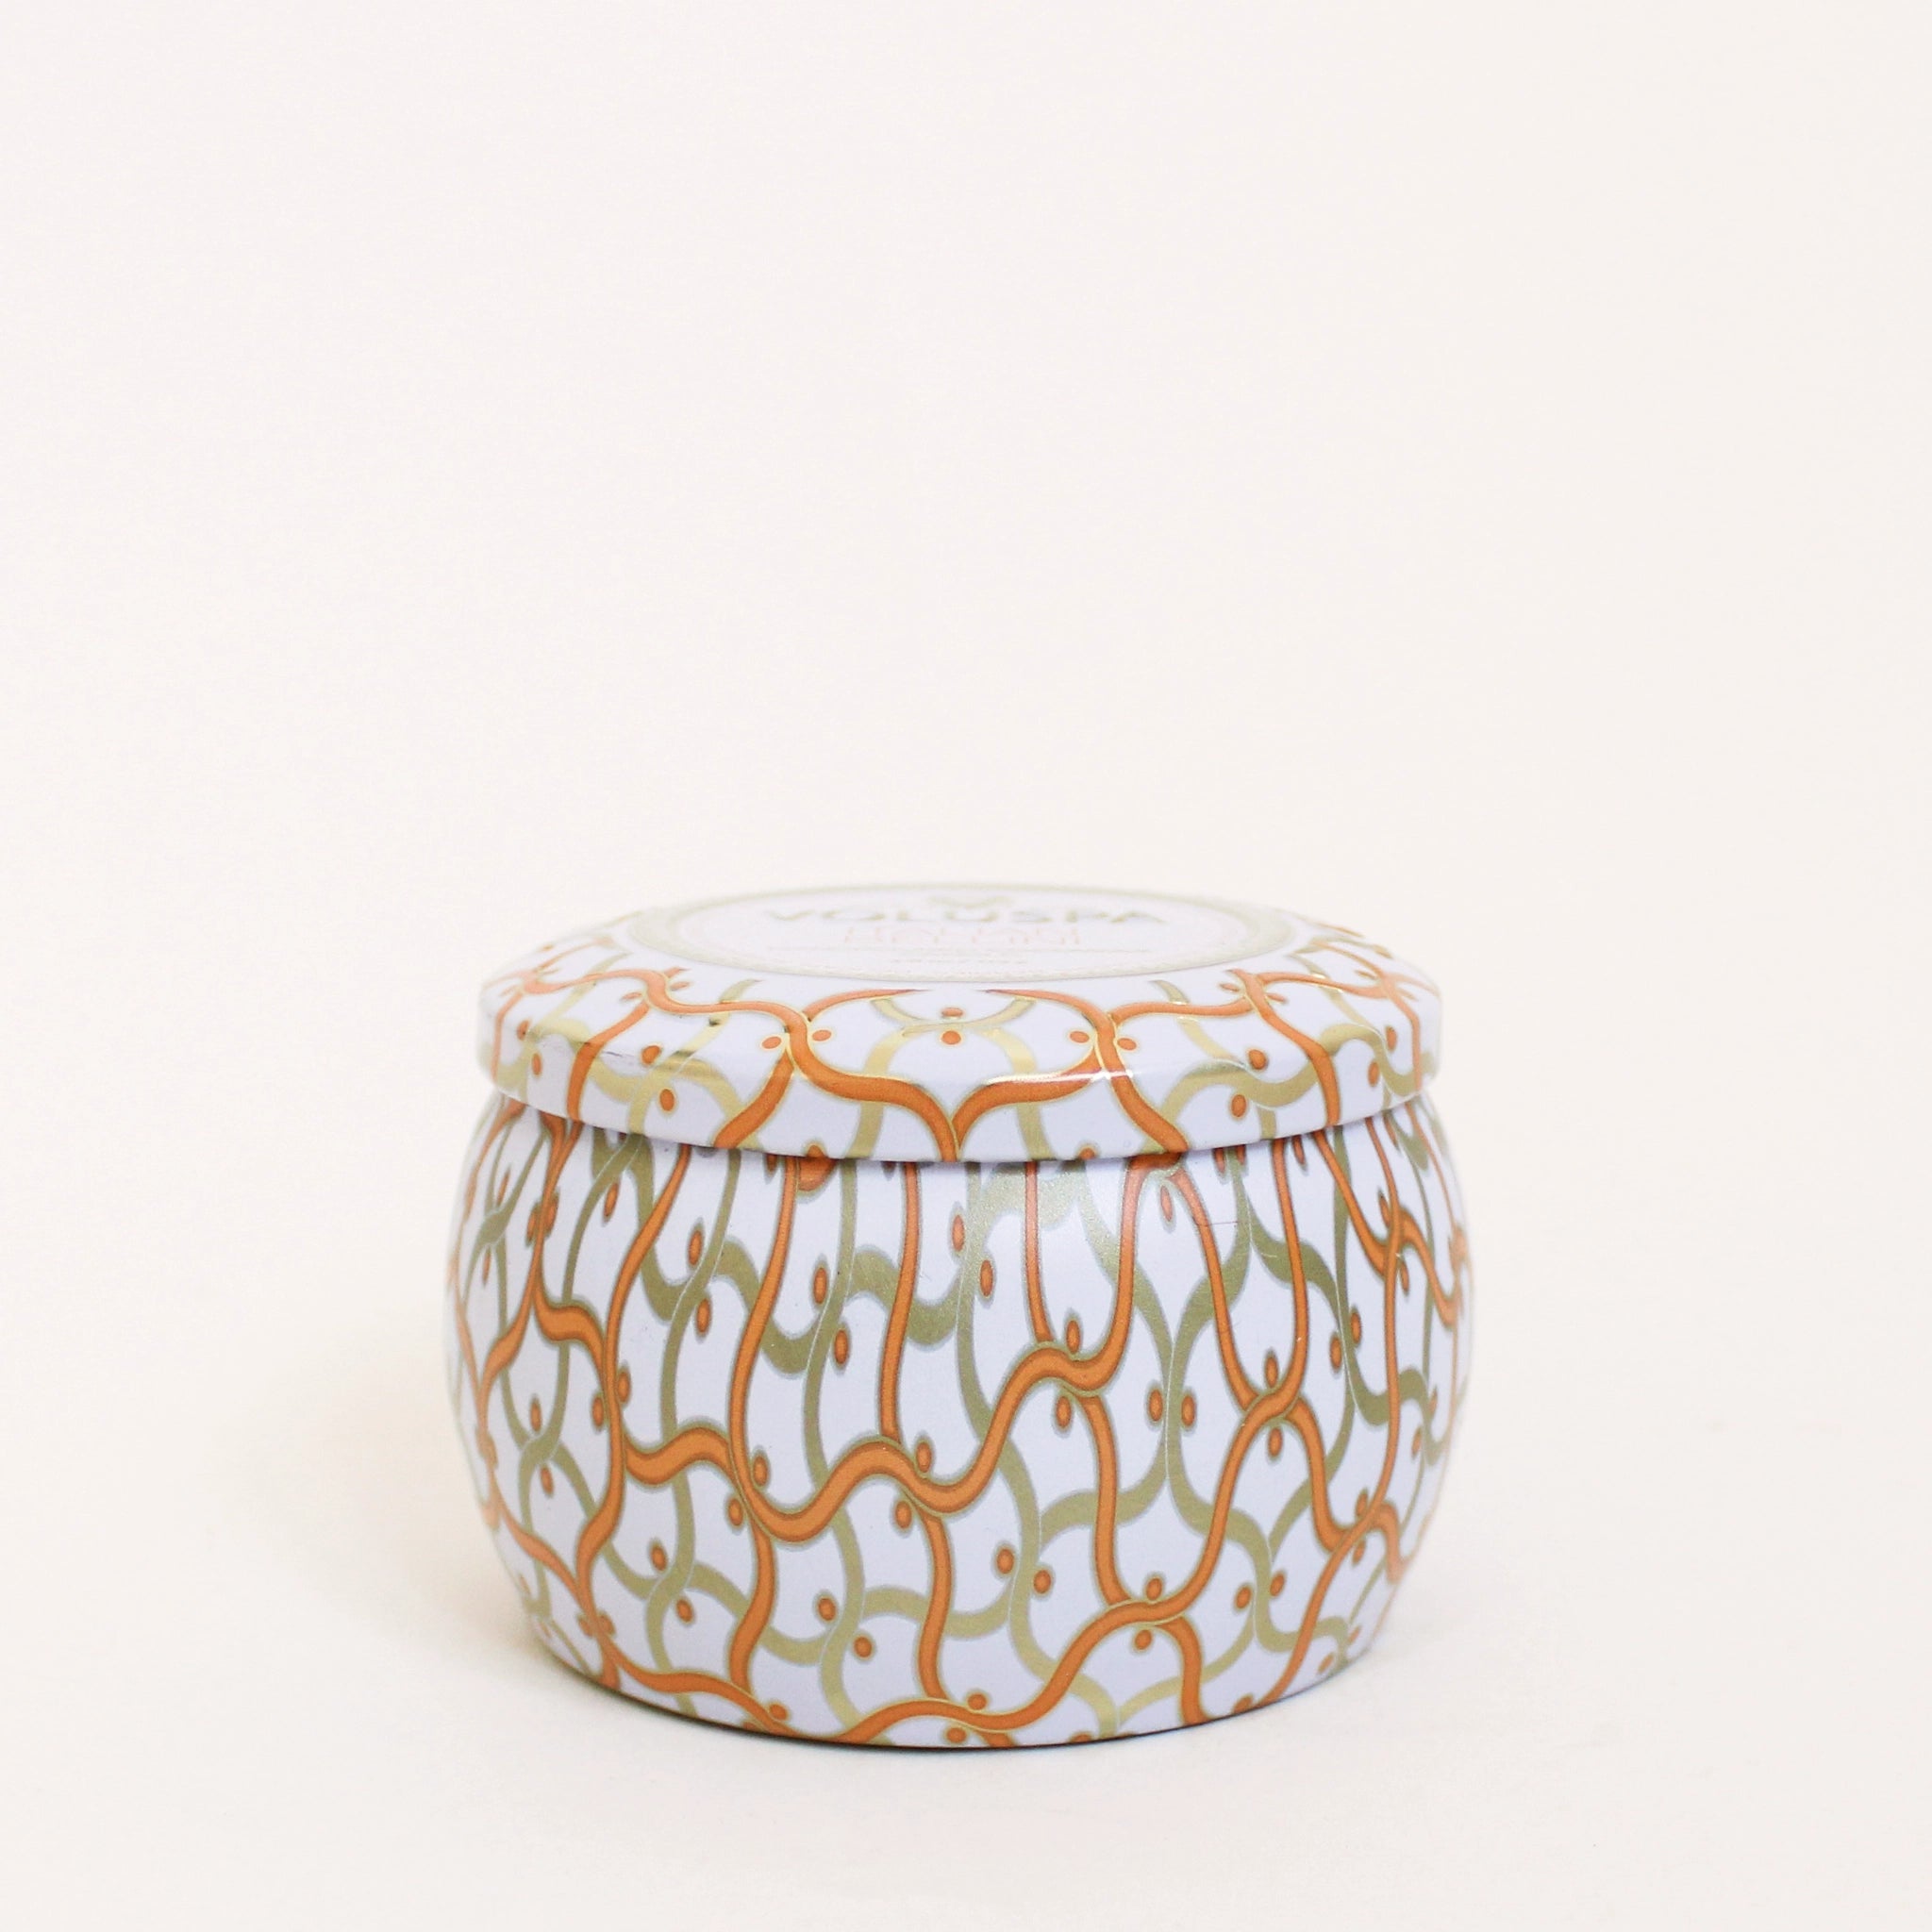 On a cream background is a orange and white tin that contains a candle along with a circle label in the center of the lid that reads, &quot;Voluspa Italian Bellini&quot;.